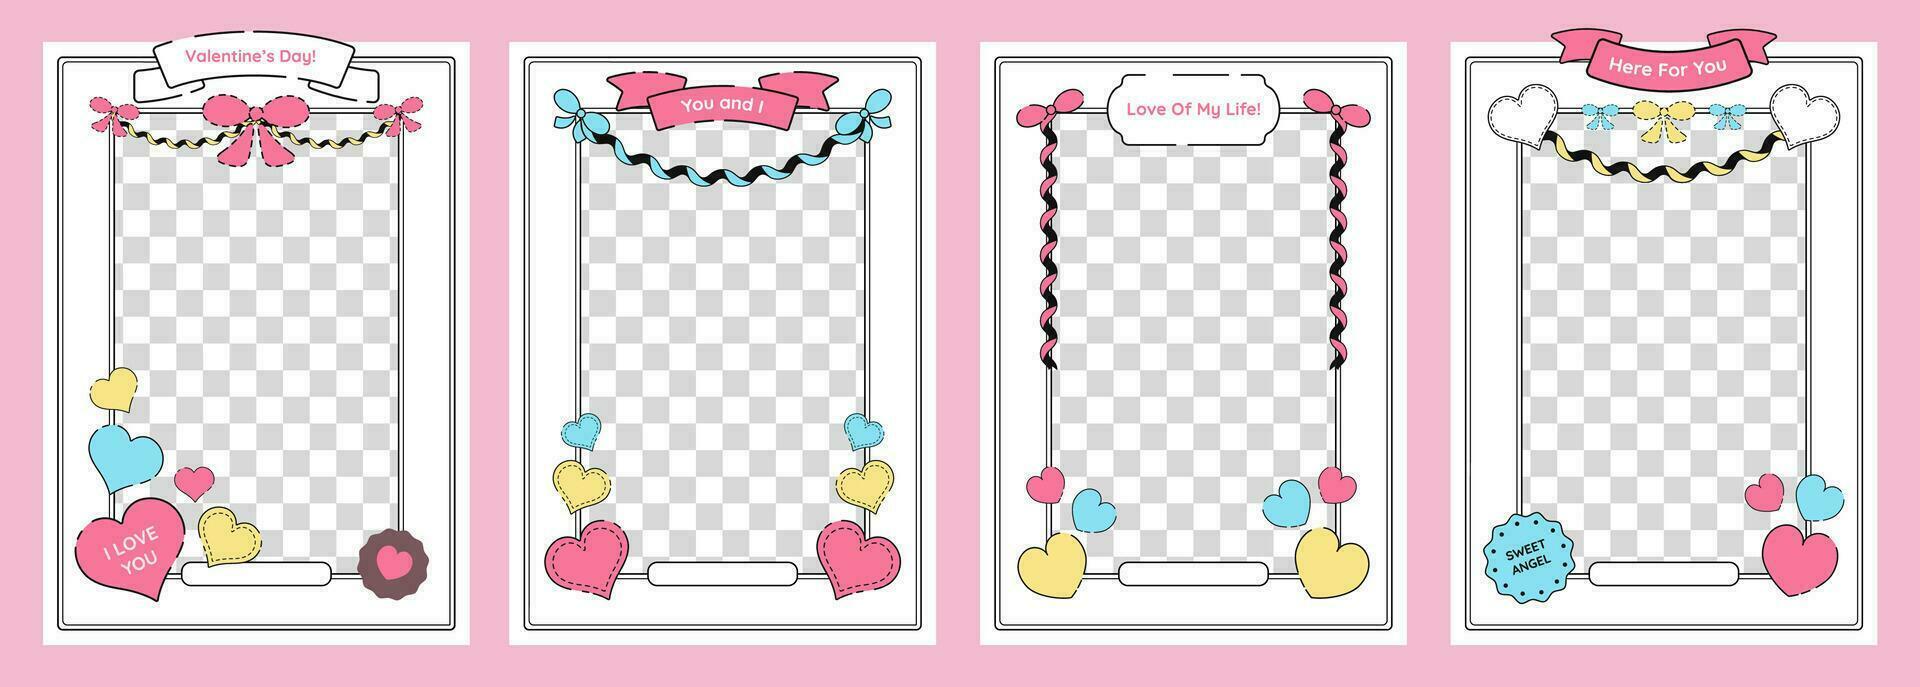 Valentine's Day poster set with emty frames, copy spaces and decorative holiday elements, hears, ribbons, bows and labels with greetings. Vector illustration.